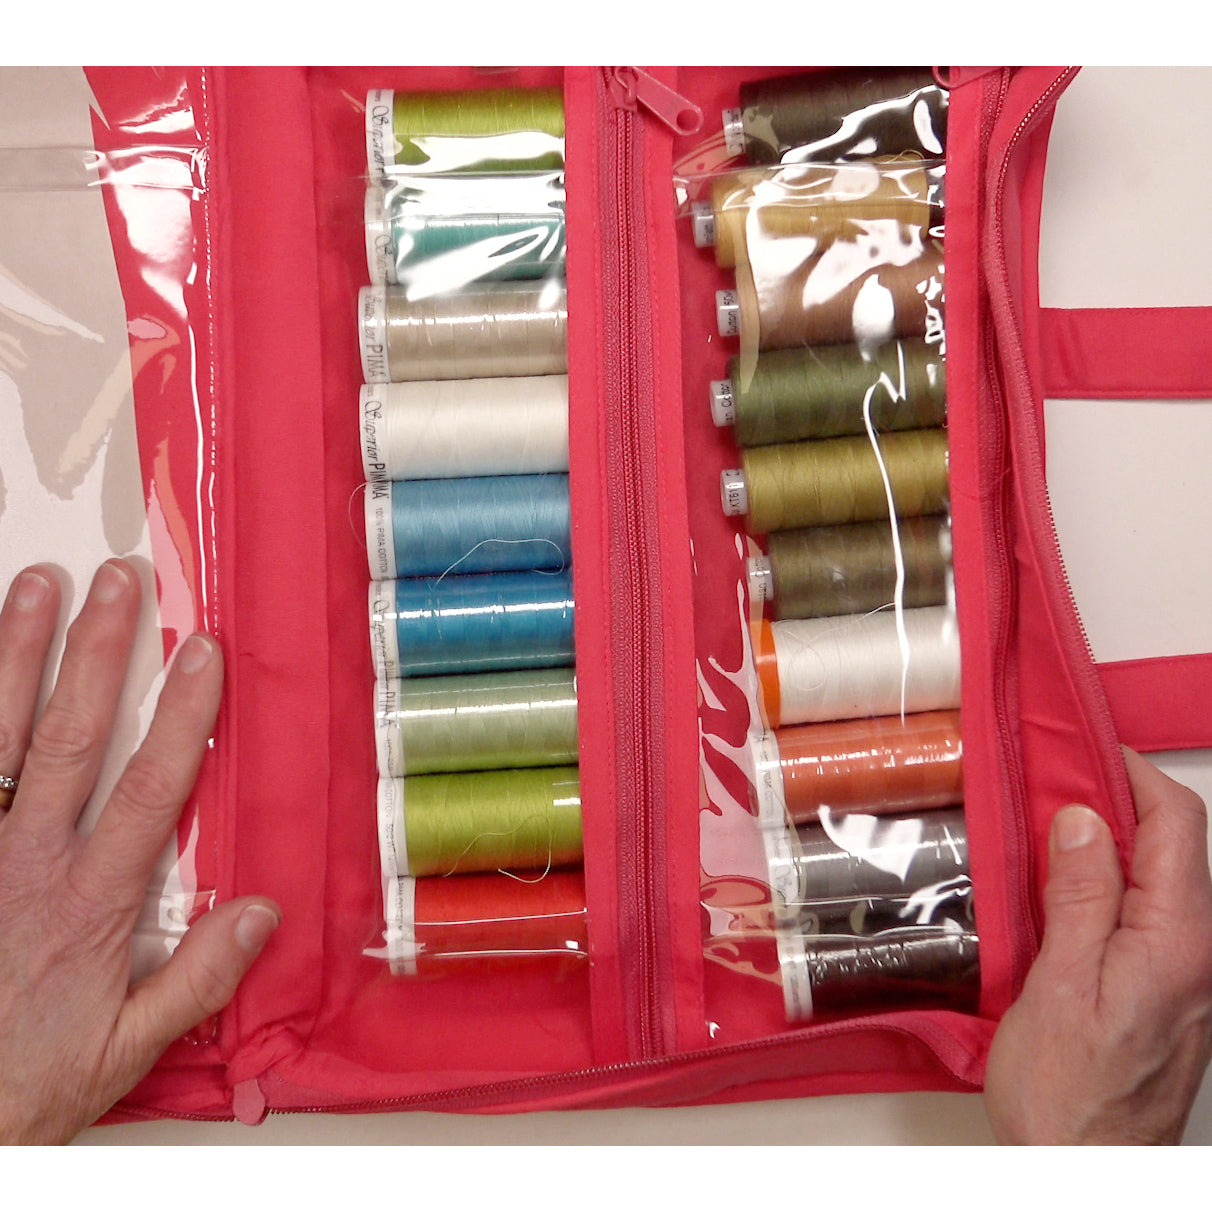 Yazzii Thread Organizer - Portable & Multipurpose - Sewing Thread Holder  Organizer for Spools, Embroidery Floss, Sewing Supplies - Perfect for